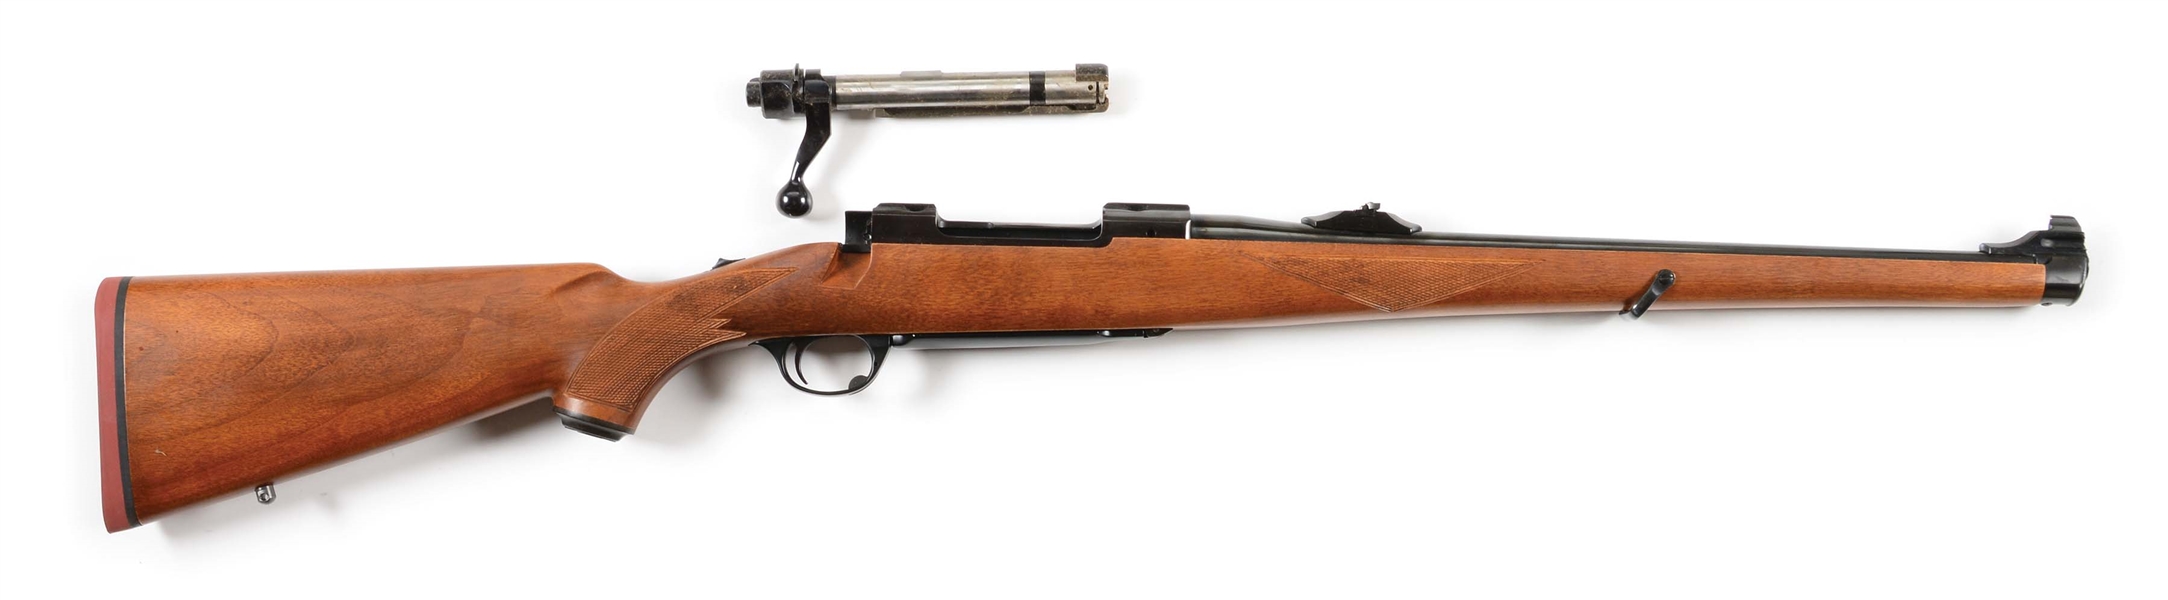 (M) RUGER M77 7X57 BOLT ACTION RIFLE WITH MANNLICHER STOCK AND BOX.